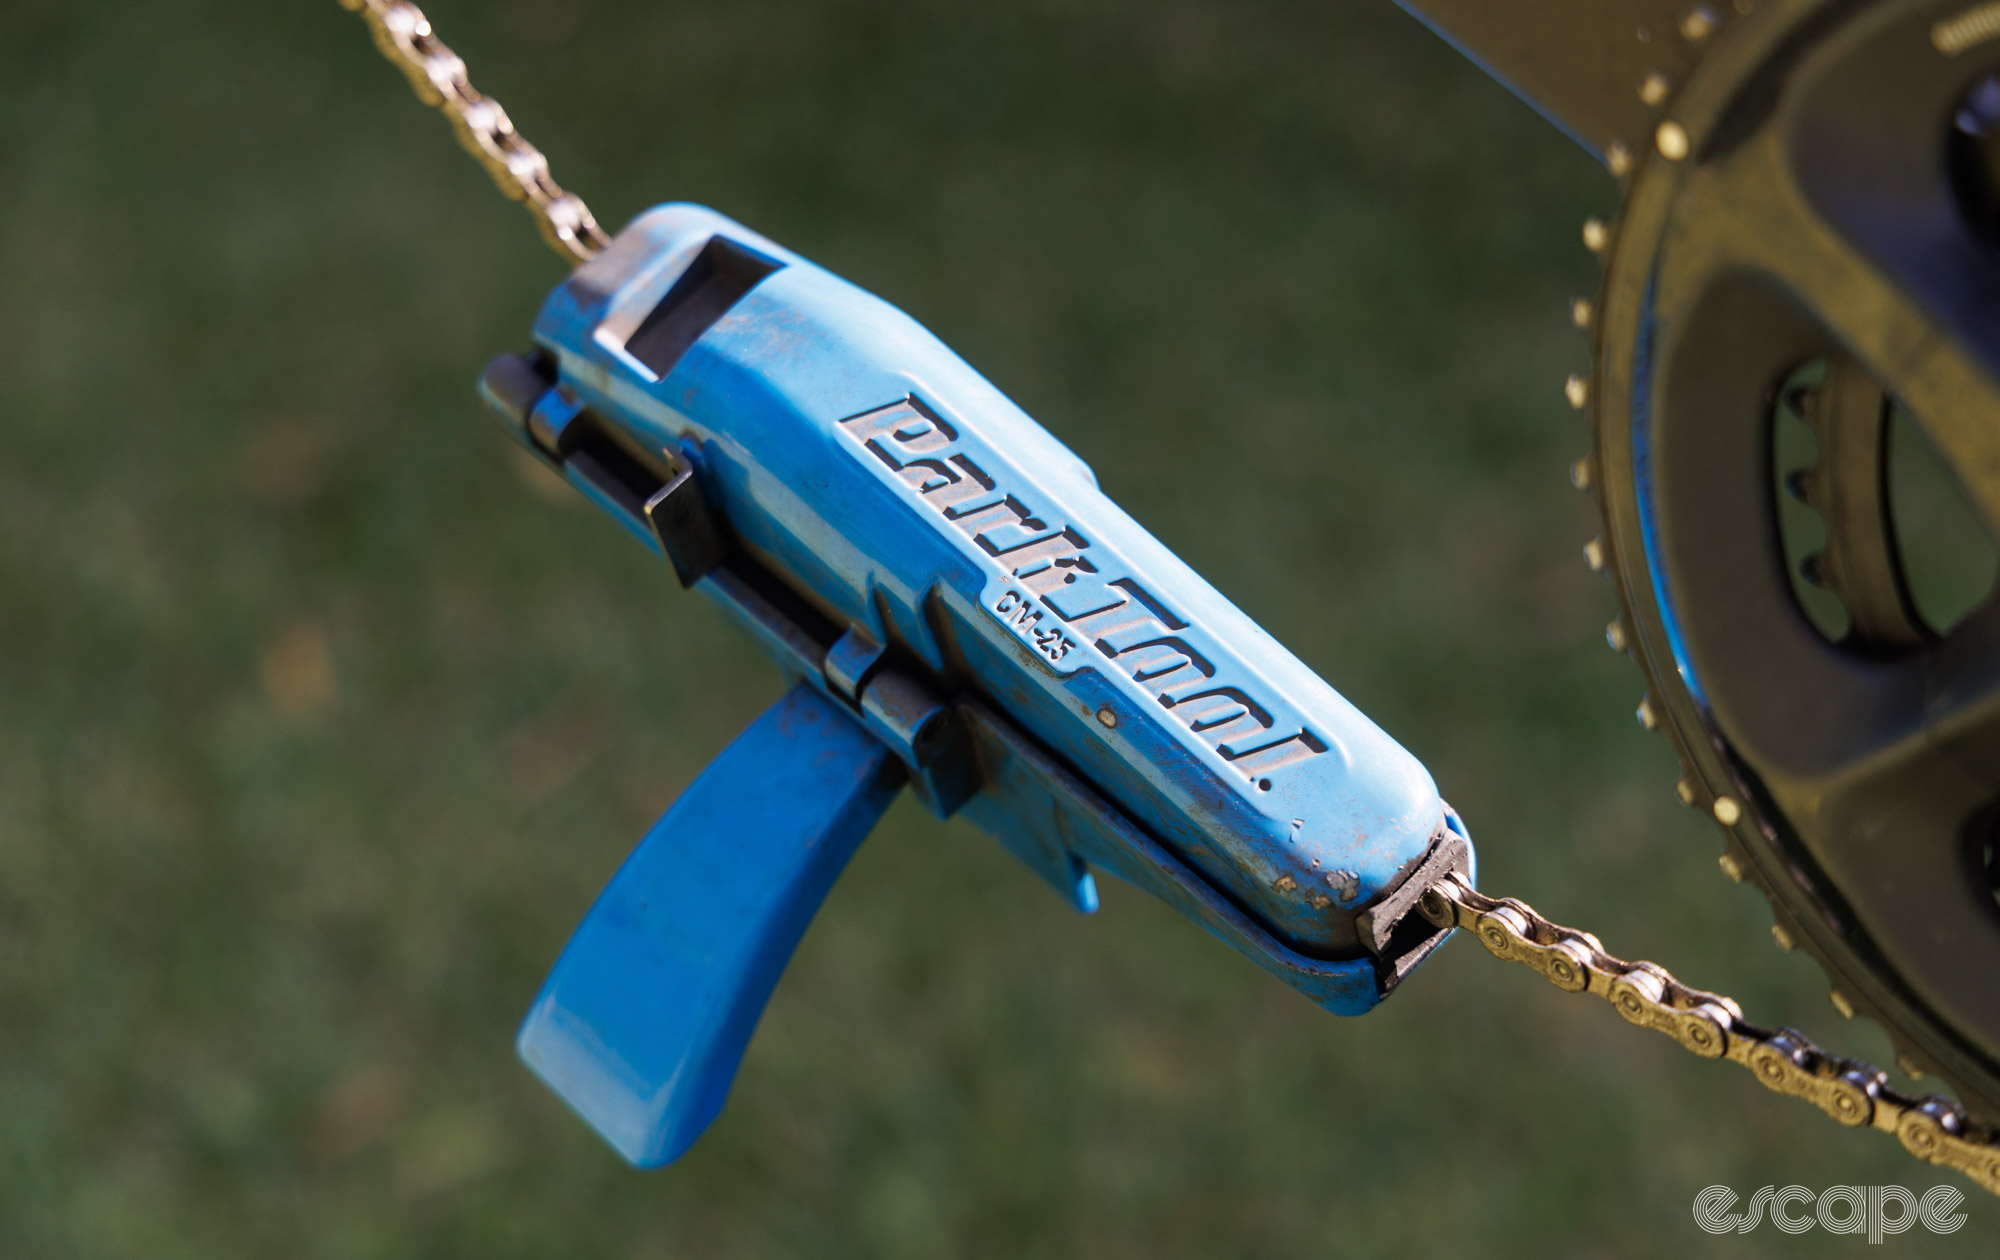 Park Tool CM-25 chain cleaner clipped onto a chain and bike. 